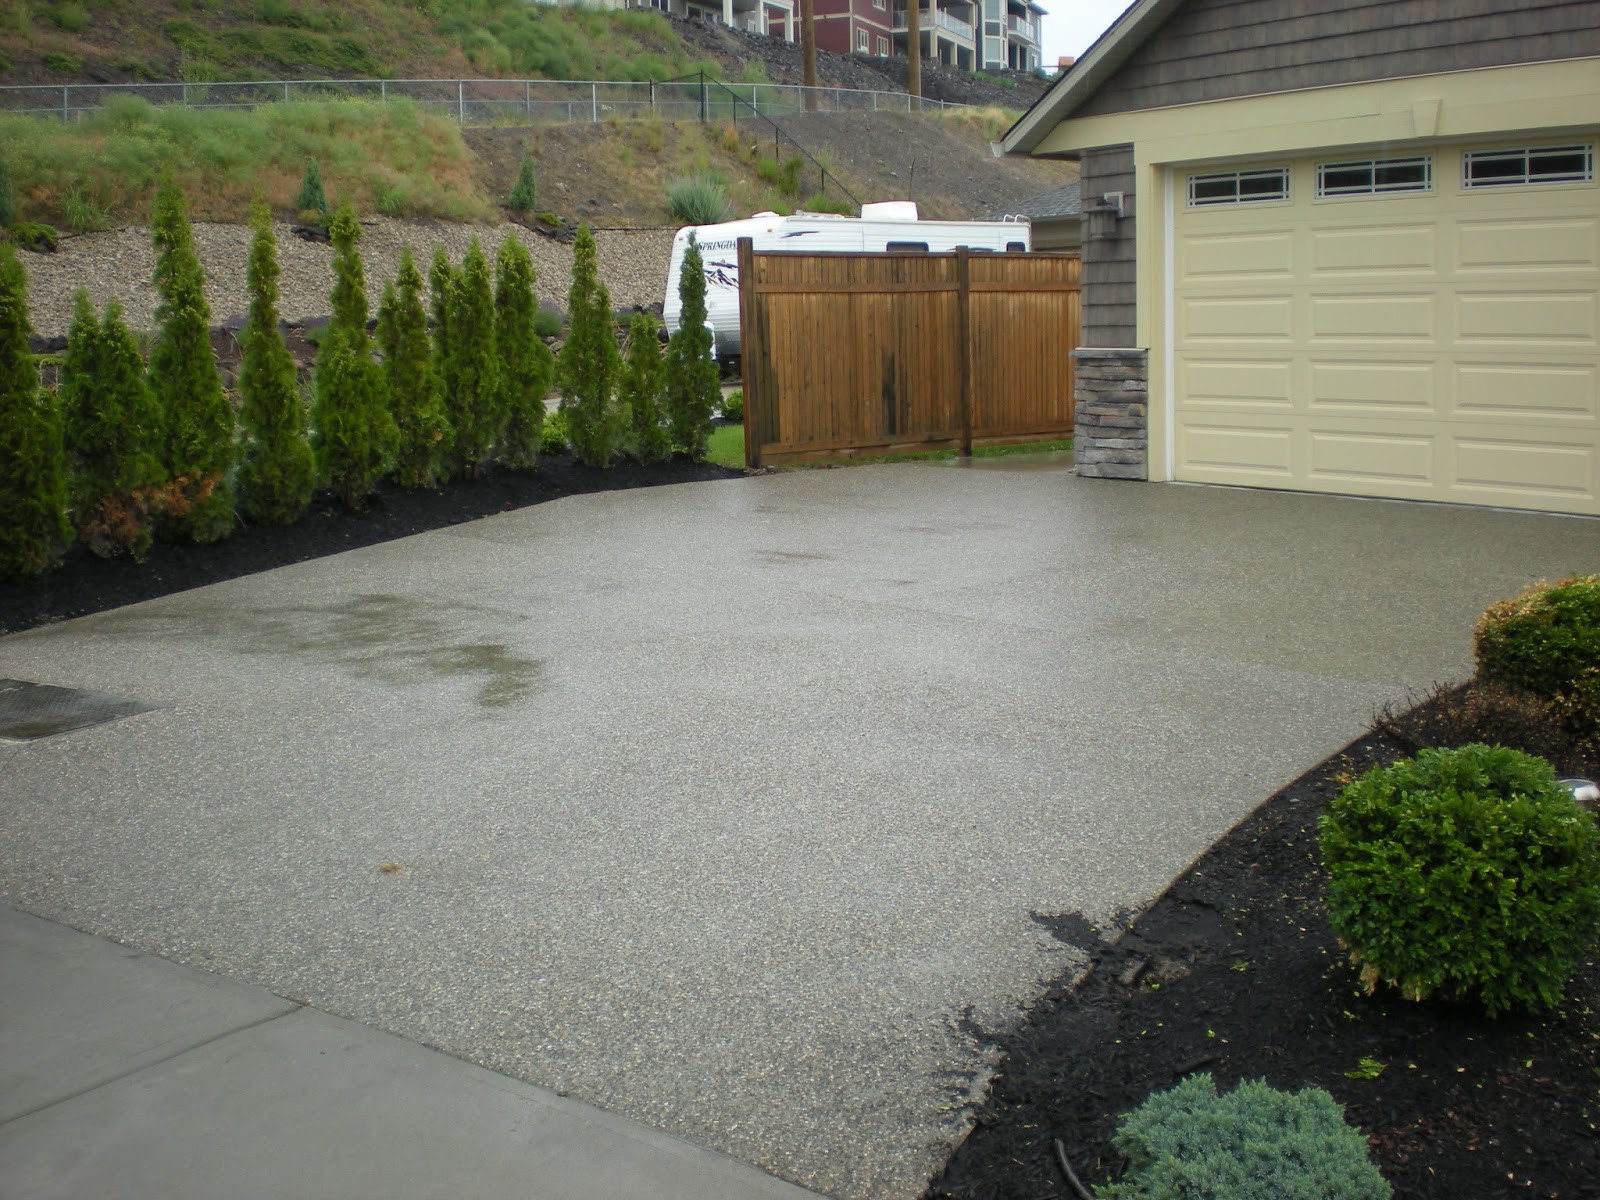 MODE CONCRETE: Concrete Driveway Pros and Cons - by Mode Concrete in